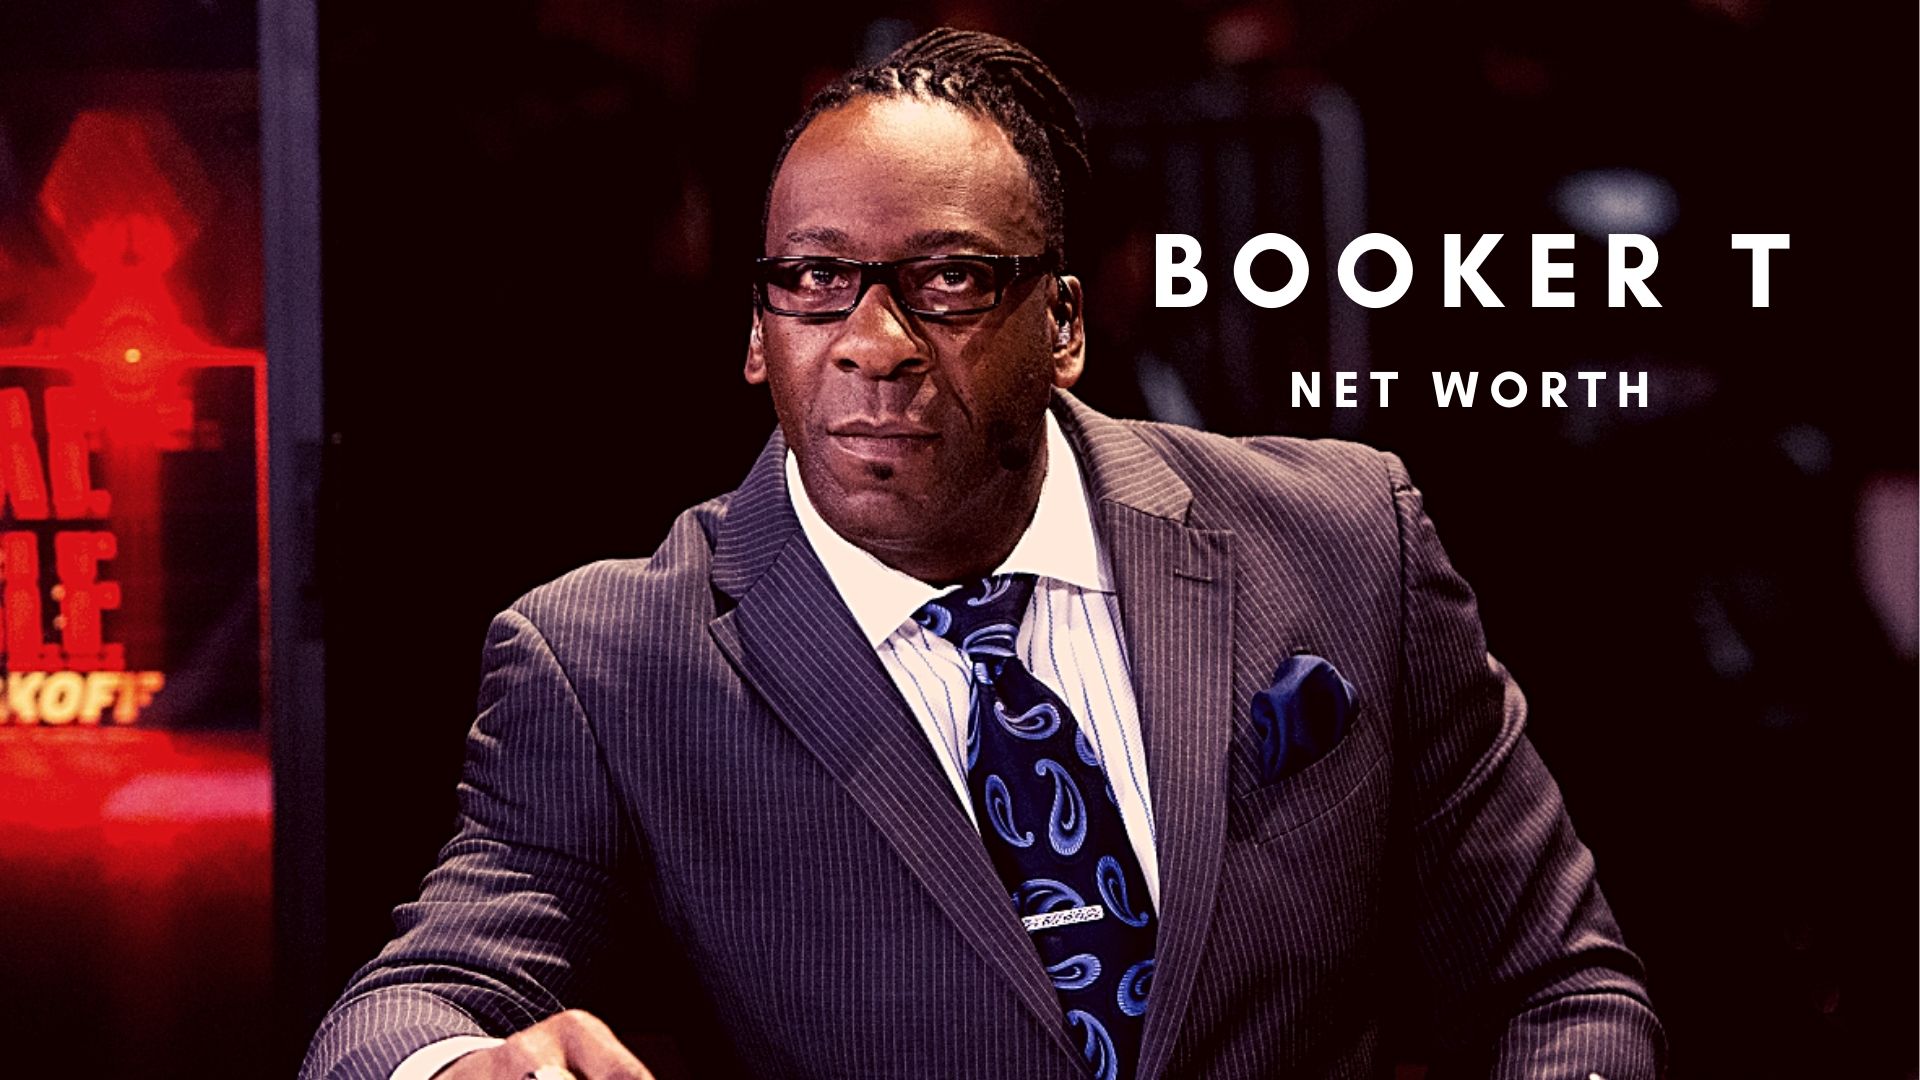 Booker T 2021 Net Worth, Salary, Records, and Personal Life